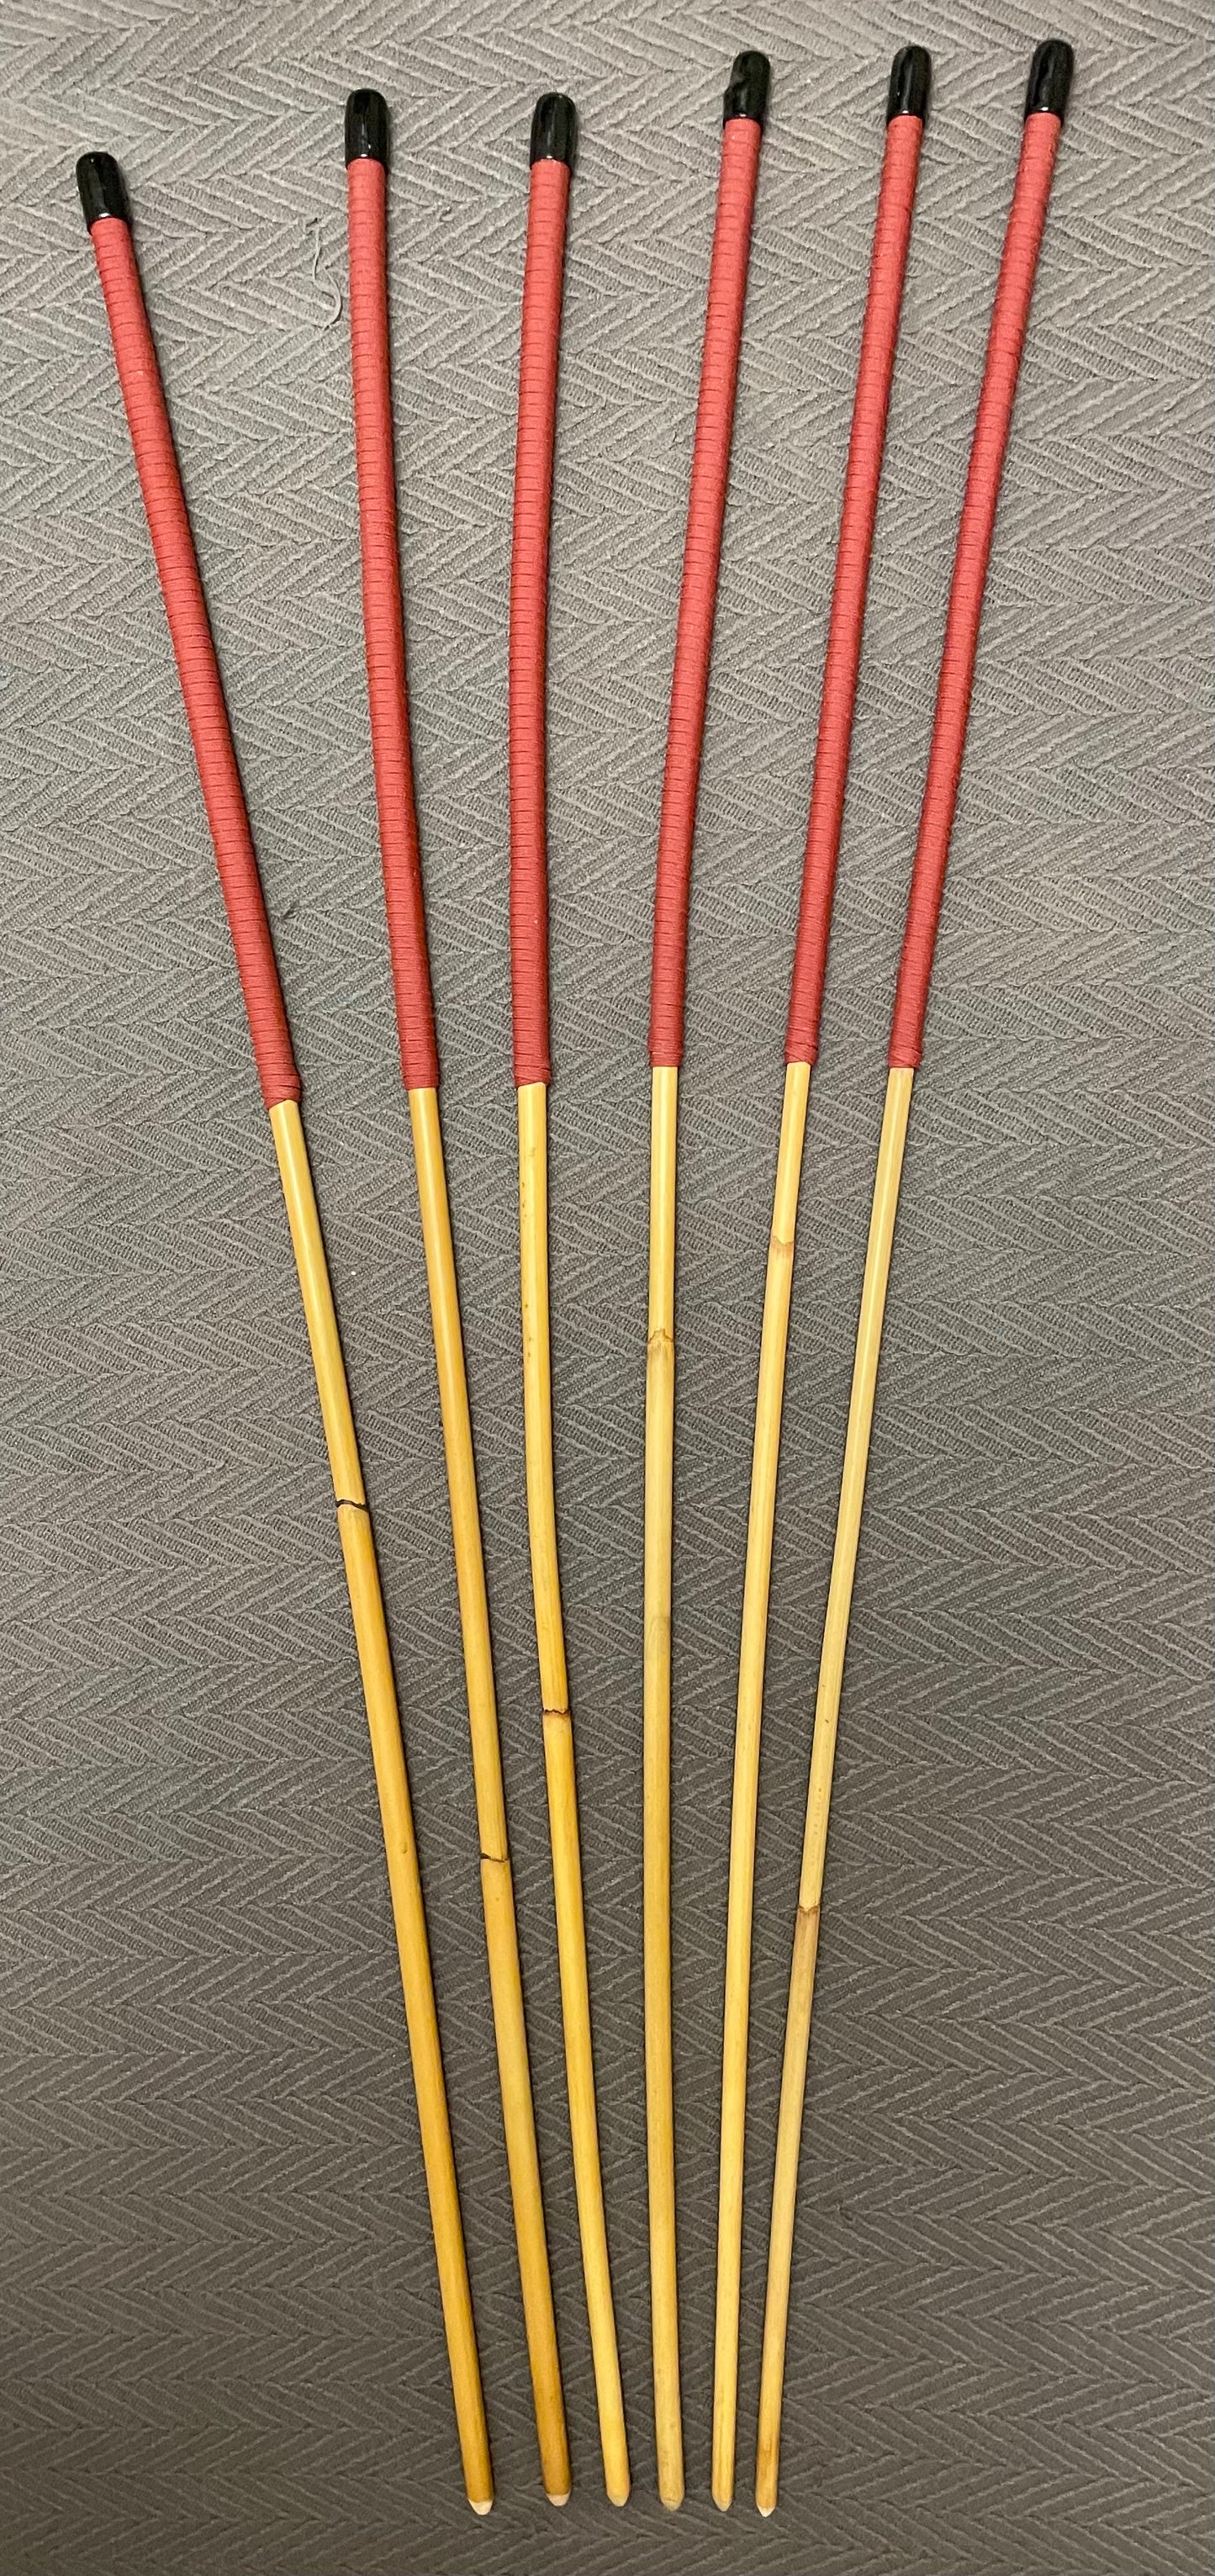 Set of 6 Classic Dragon Rattan Punishment Canes / School Canes  with Red Paracord Handles